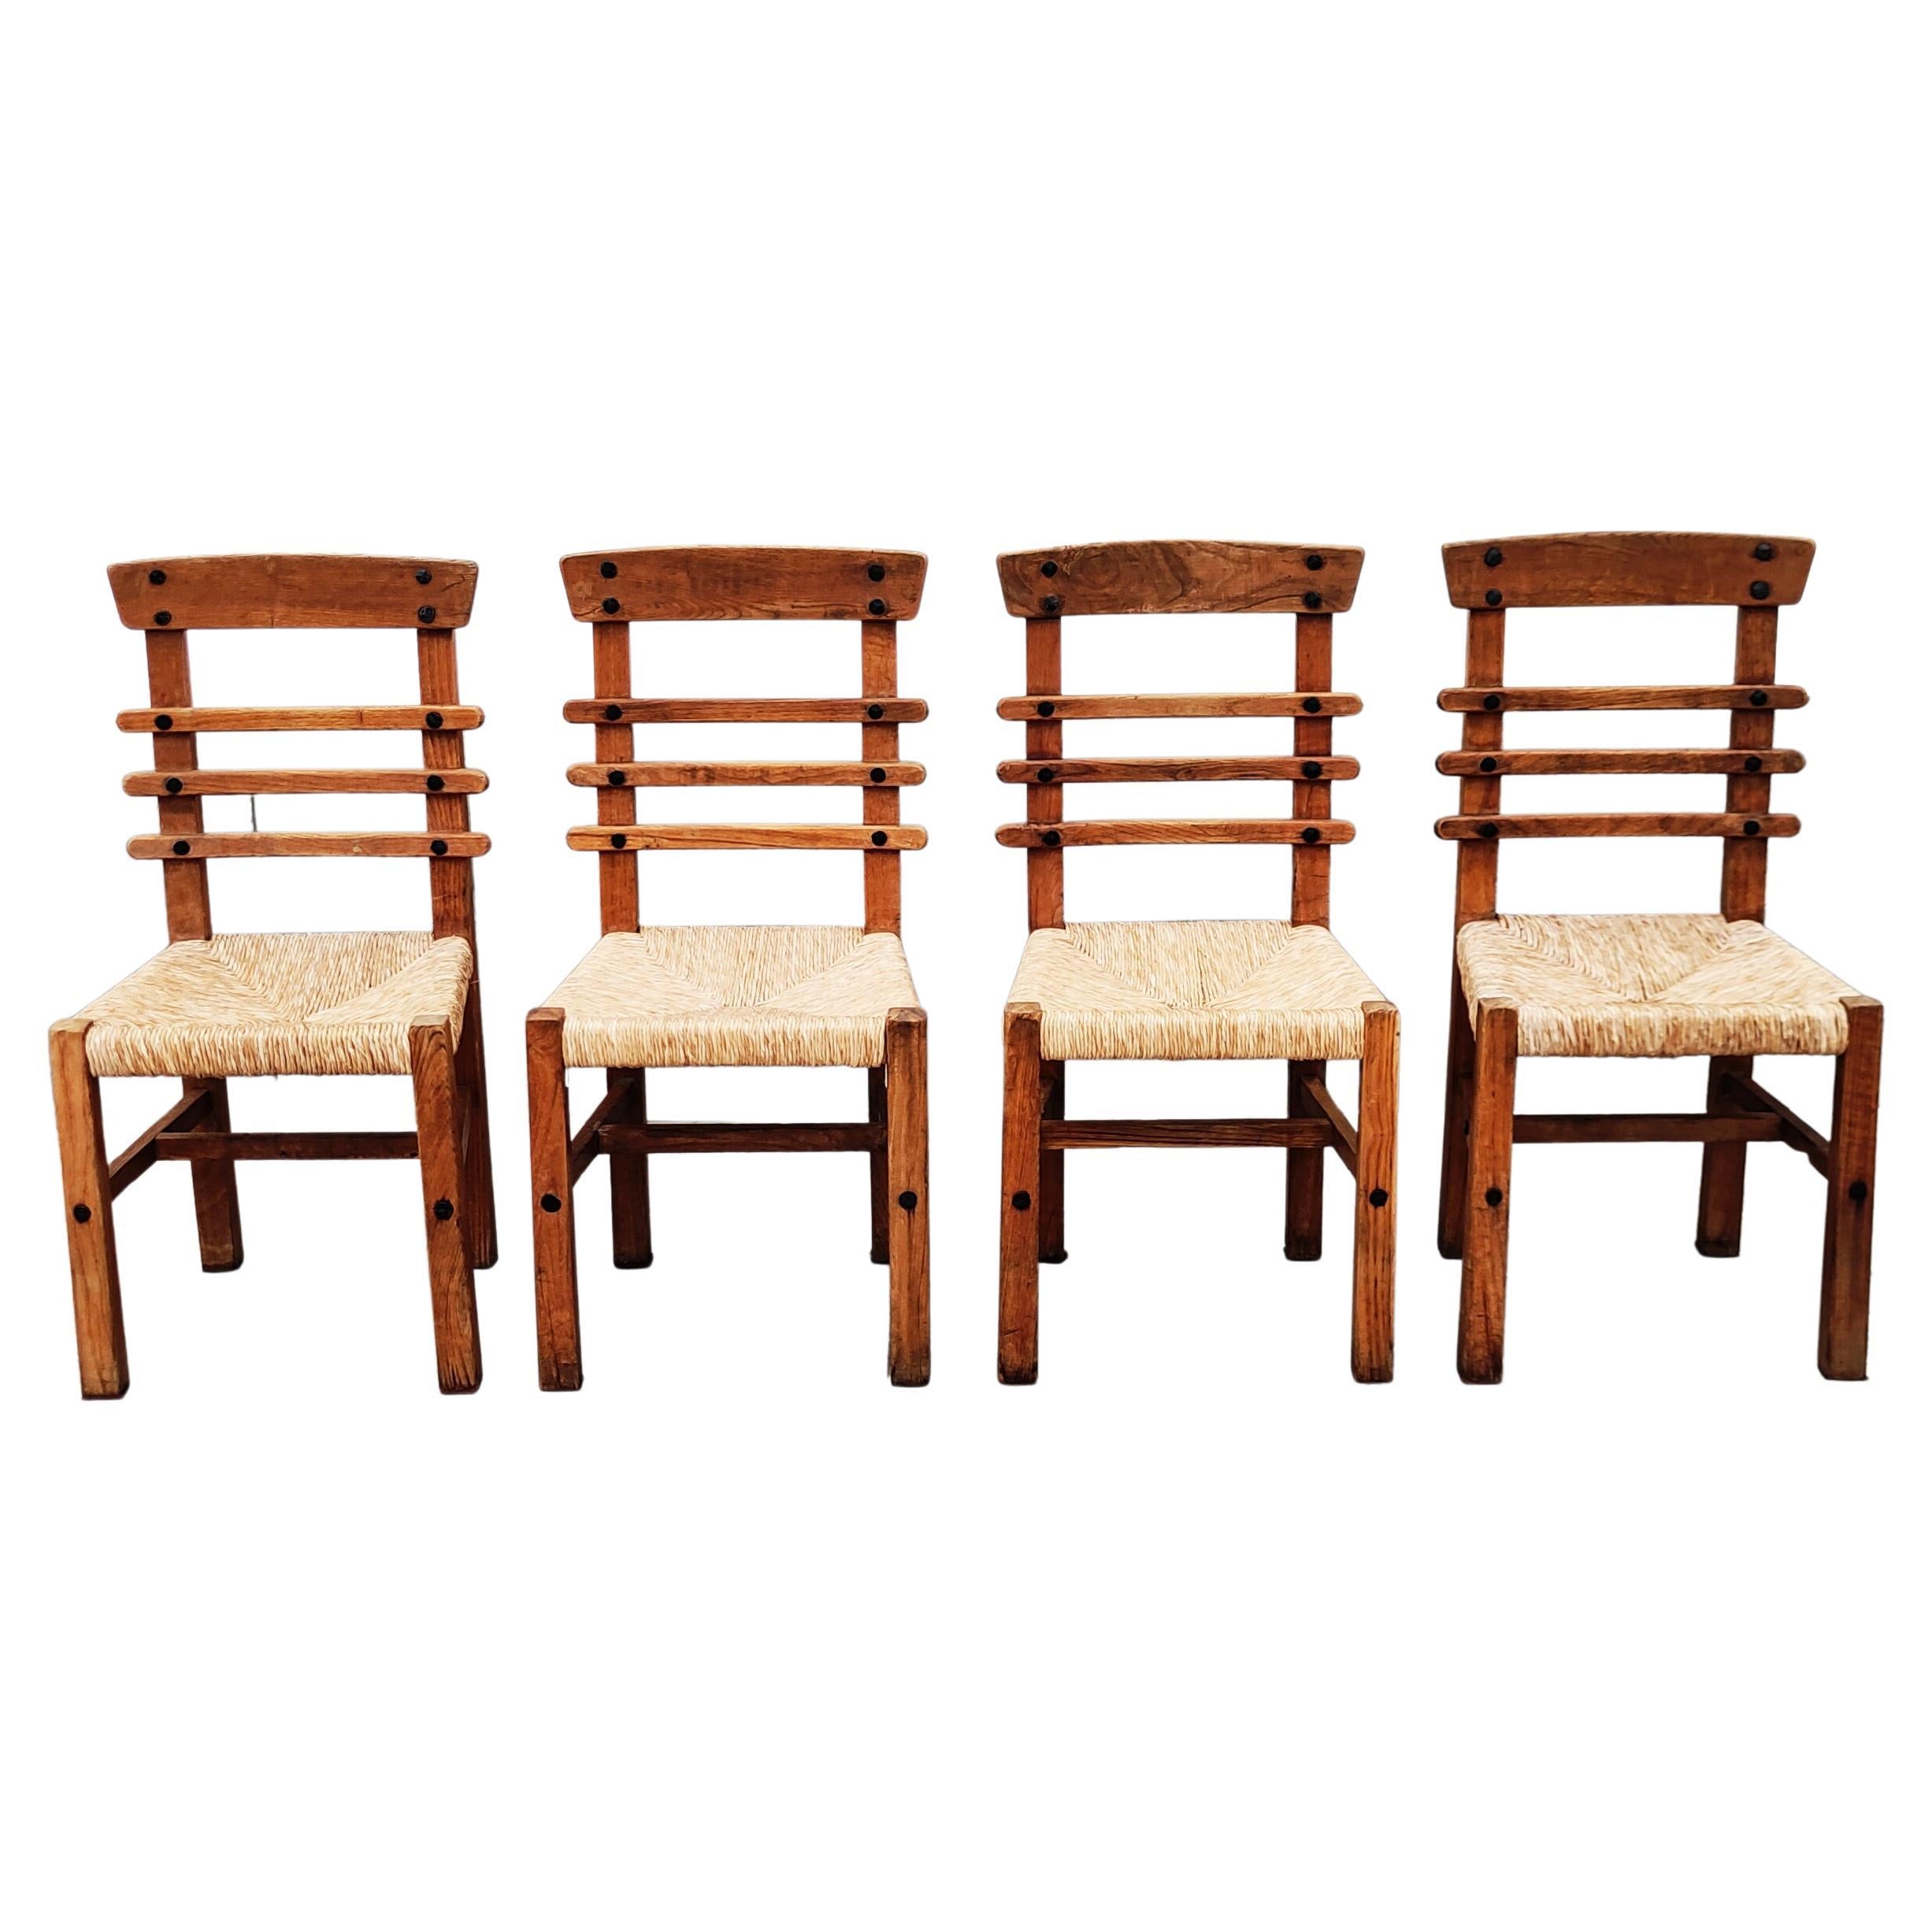 Set of 4 Brutalist Oak and Straw Dining Chairs, Spain, 1950